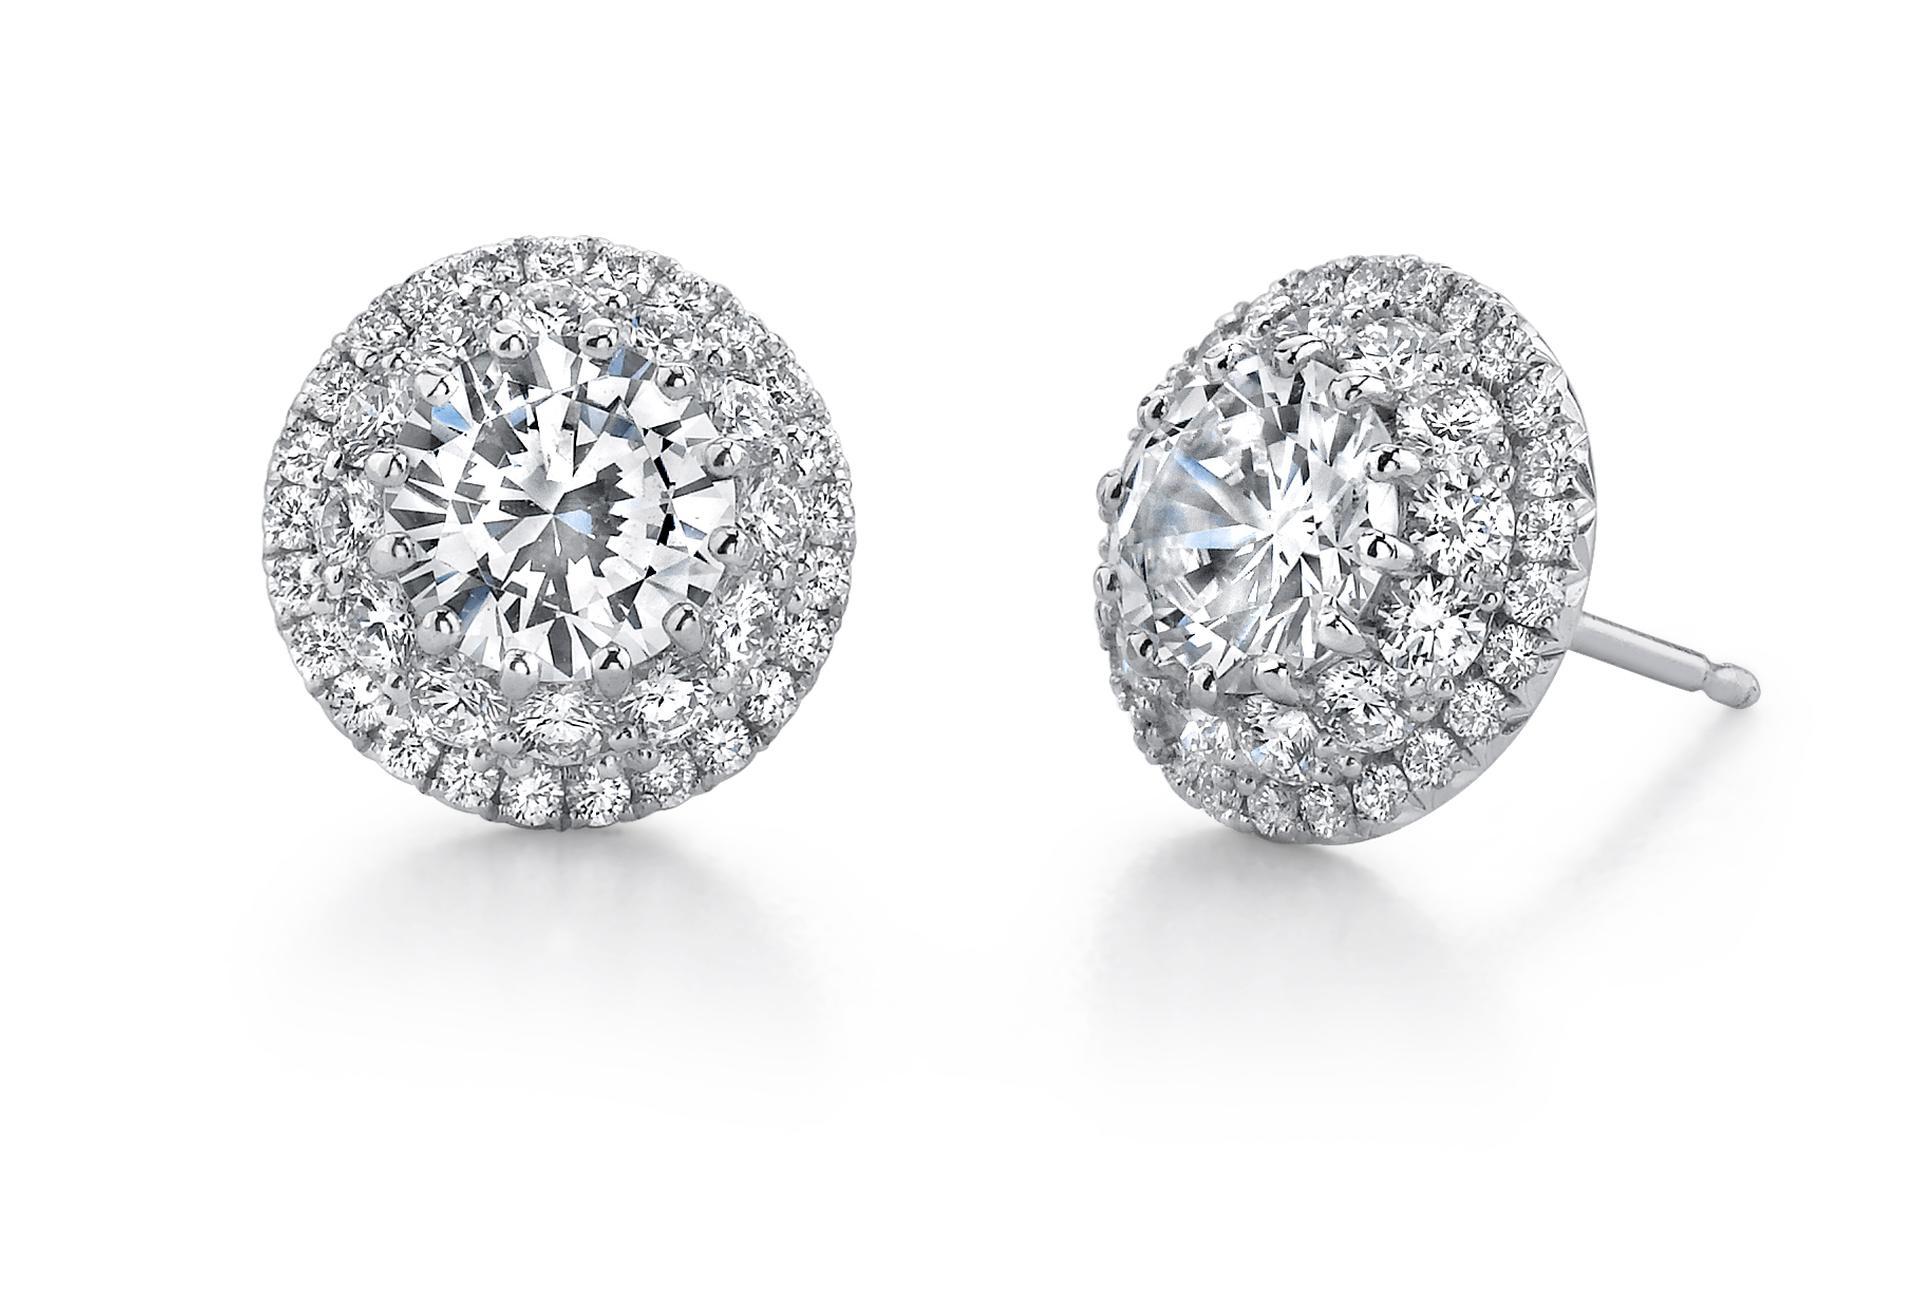 French Cut Round Cut Double Halo Diamond Earrings Platinum 950 For Sale